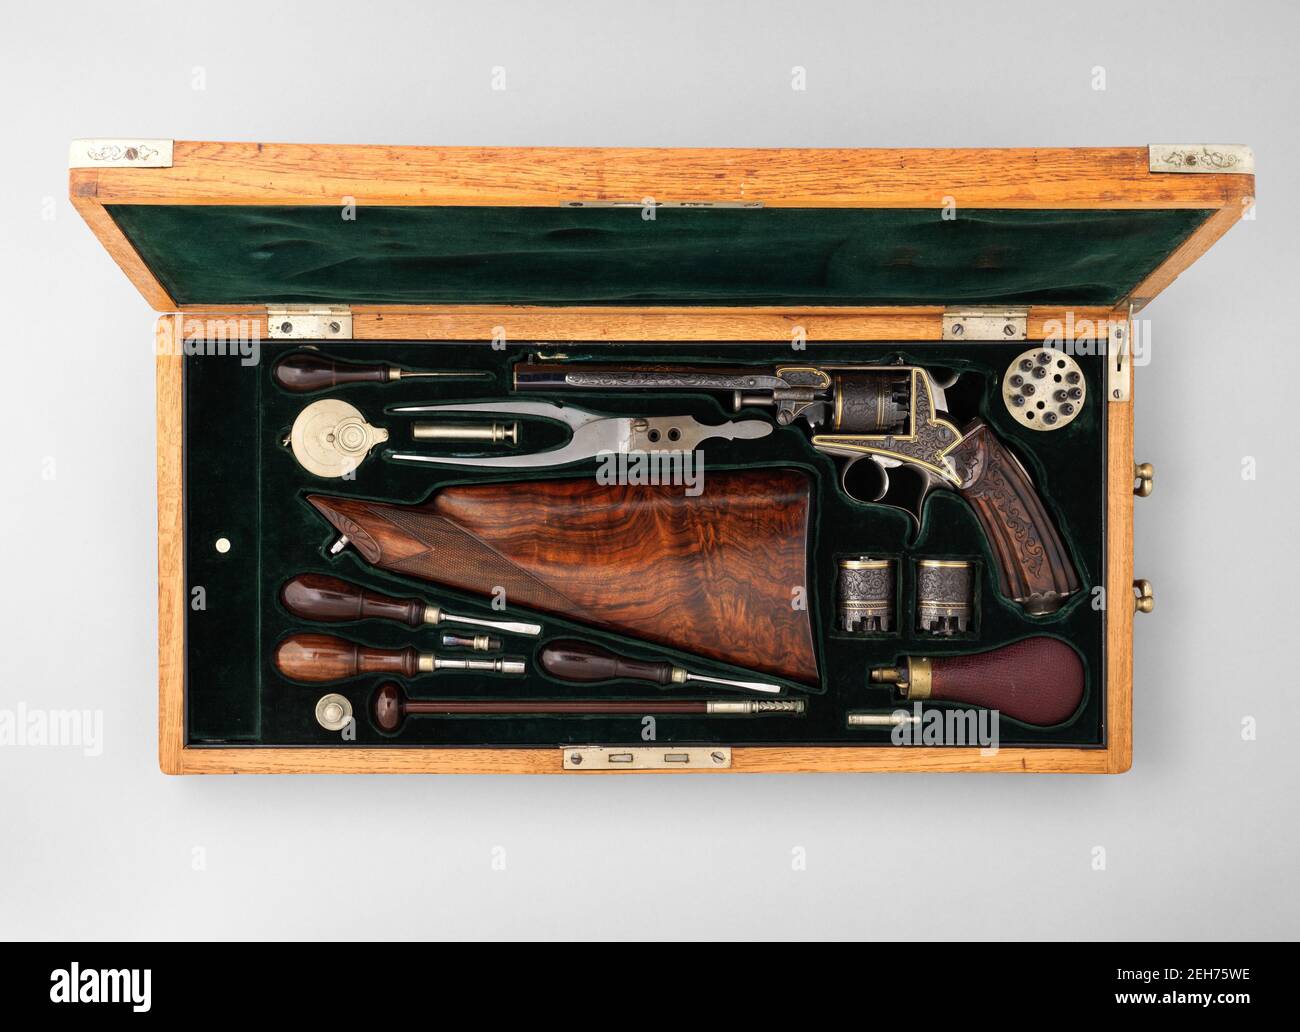 Five Shot Double-Action Percussion Revolver with Shoulder Stock, Case, and Accessories, German, ca. 1860. Stock Photo